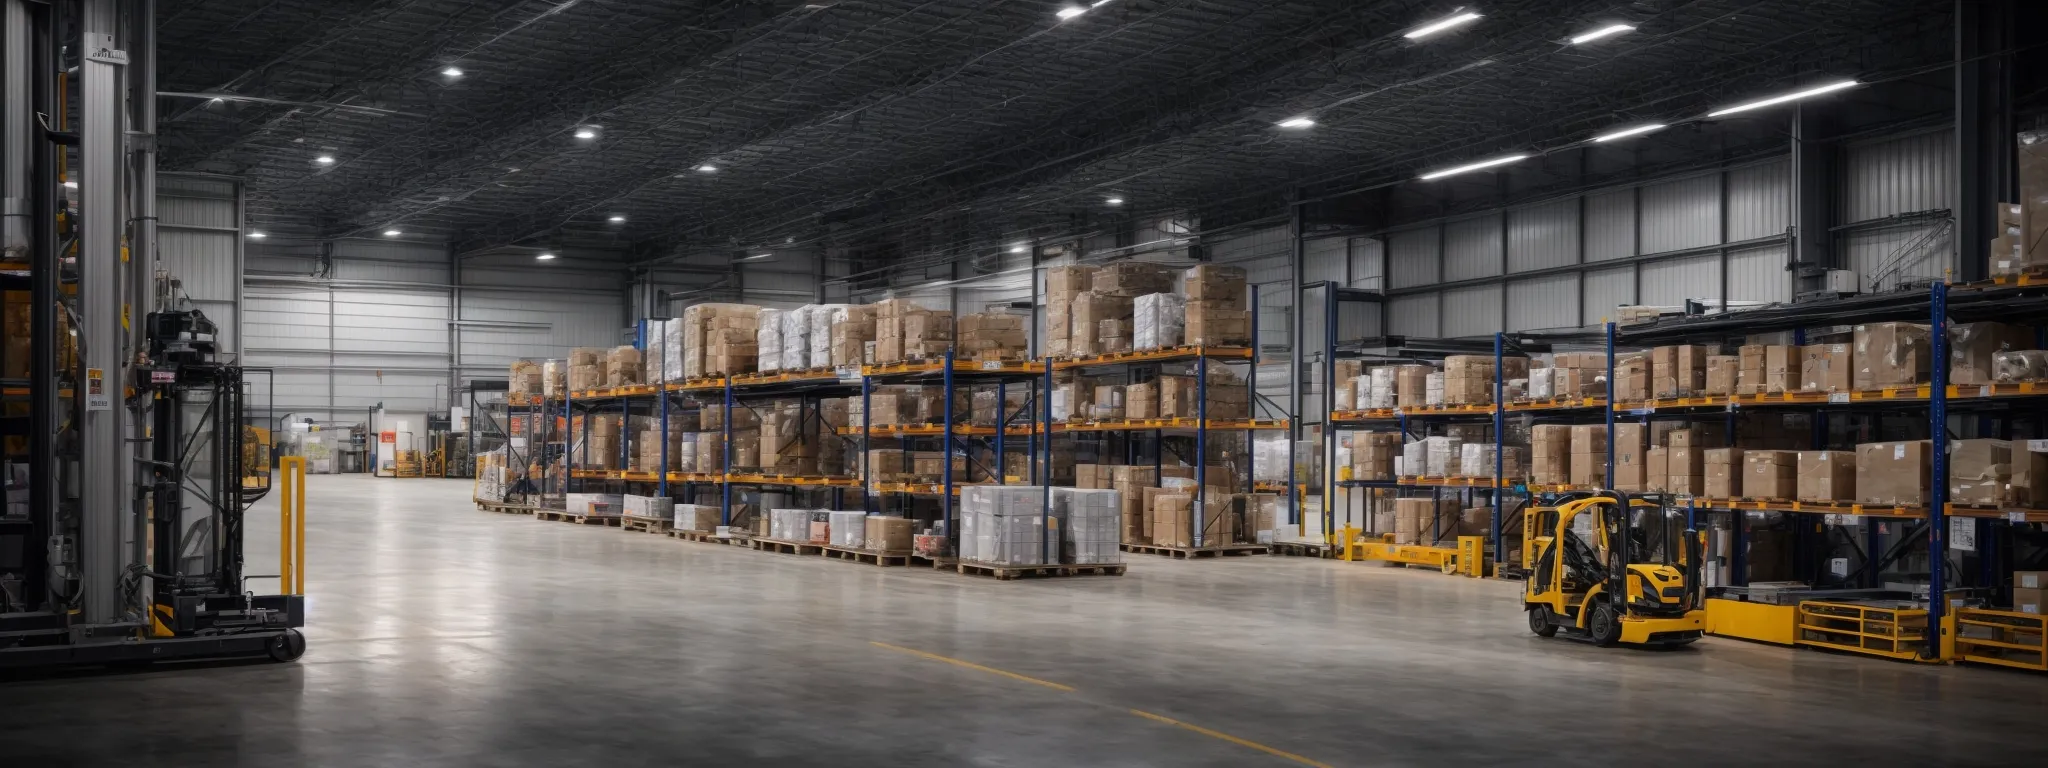 a warehouse equipped with advanced technology and renewable energy solutions reflects modern sustainable inventory management strategies.